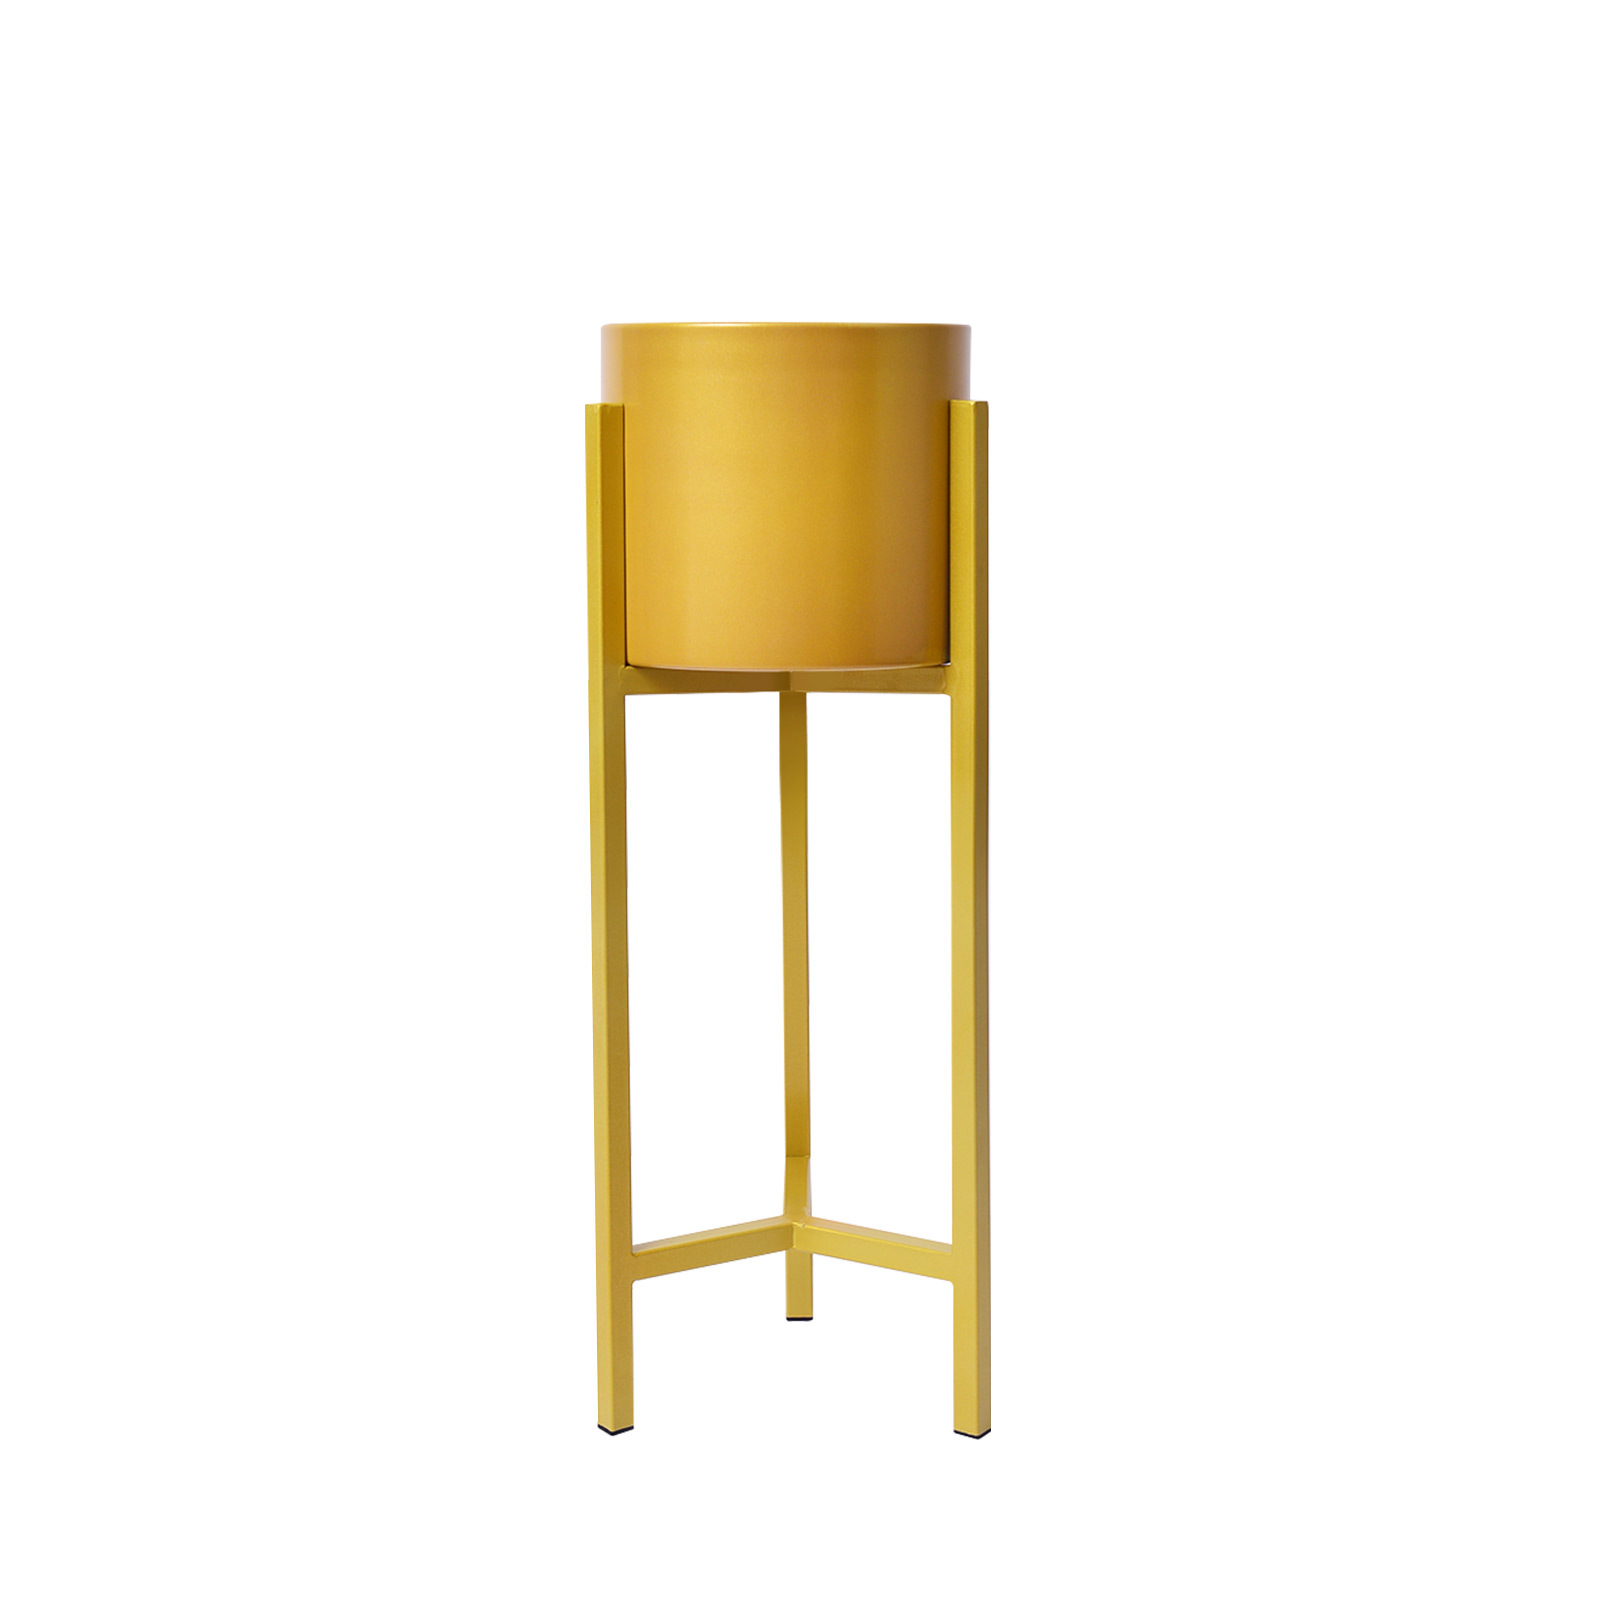 65cm Plant Stand 1 Tier - GOLD